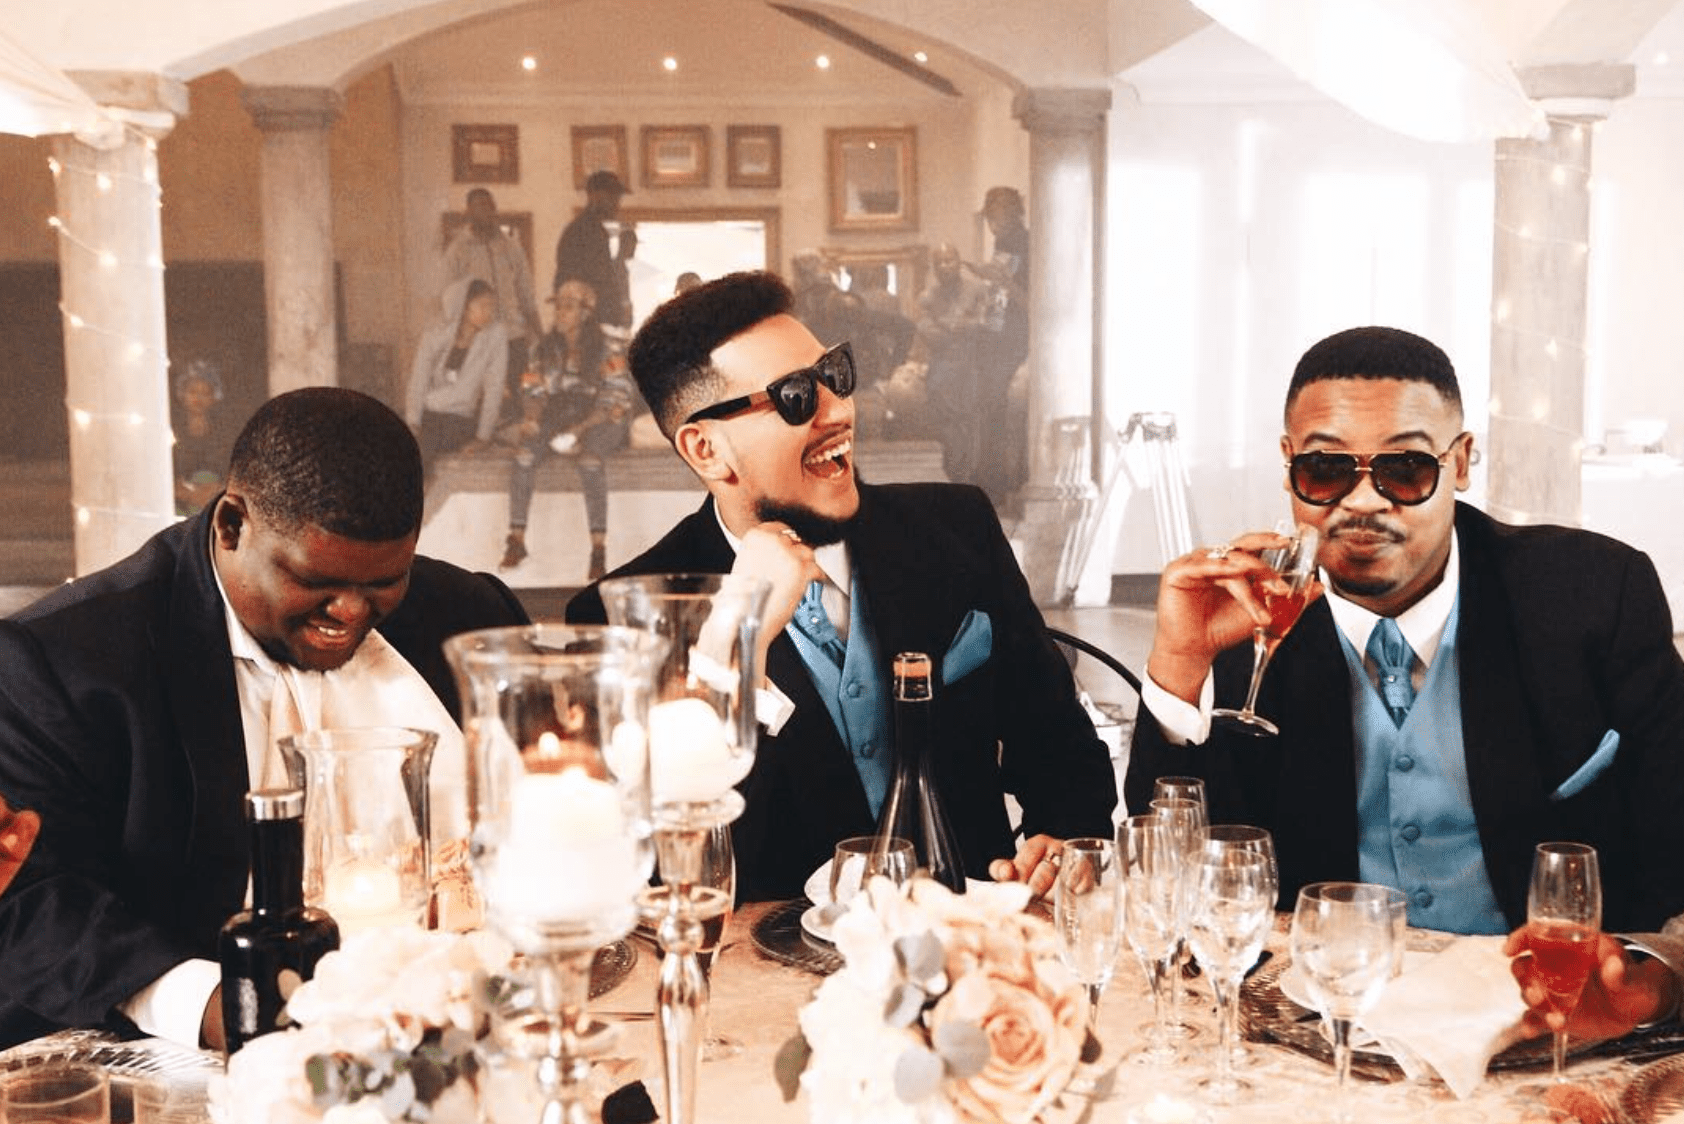 A possible wedding between Matheba and Forbes? Watch AKA’s music video for “Caiphus Song”